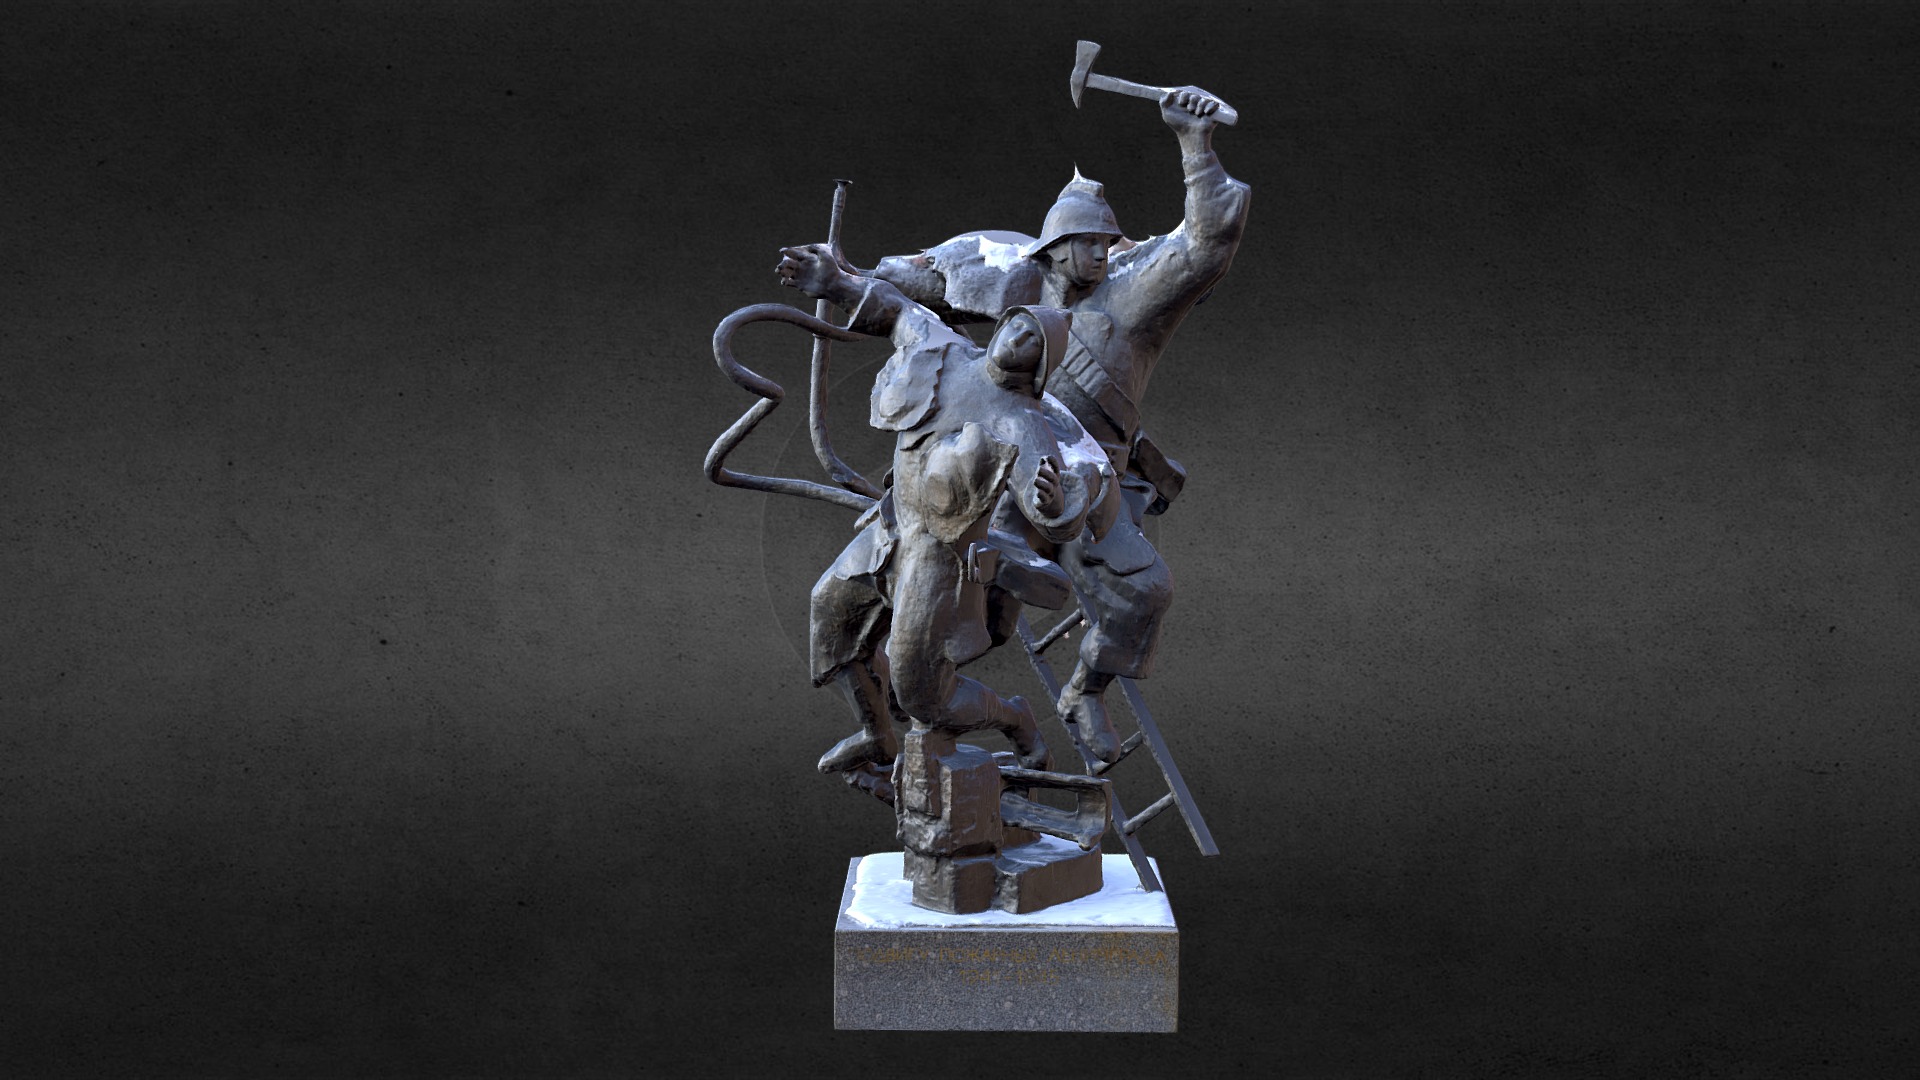 3D model Firefighters Monument in Russia, St. Petersburg - This is a 3D model of the Firefighters Monument in Russia, St. Petersburg. The 3D model is about a statue of a group of men.